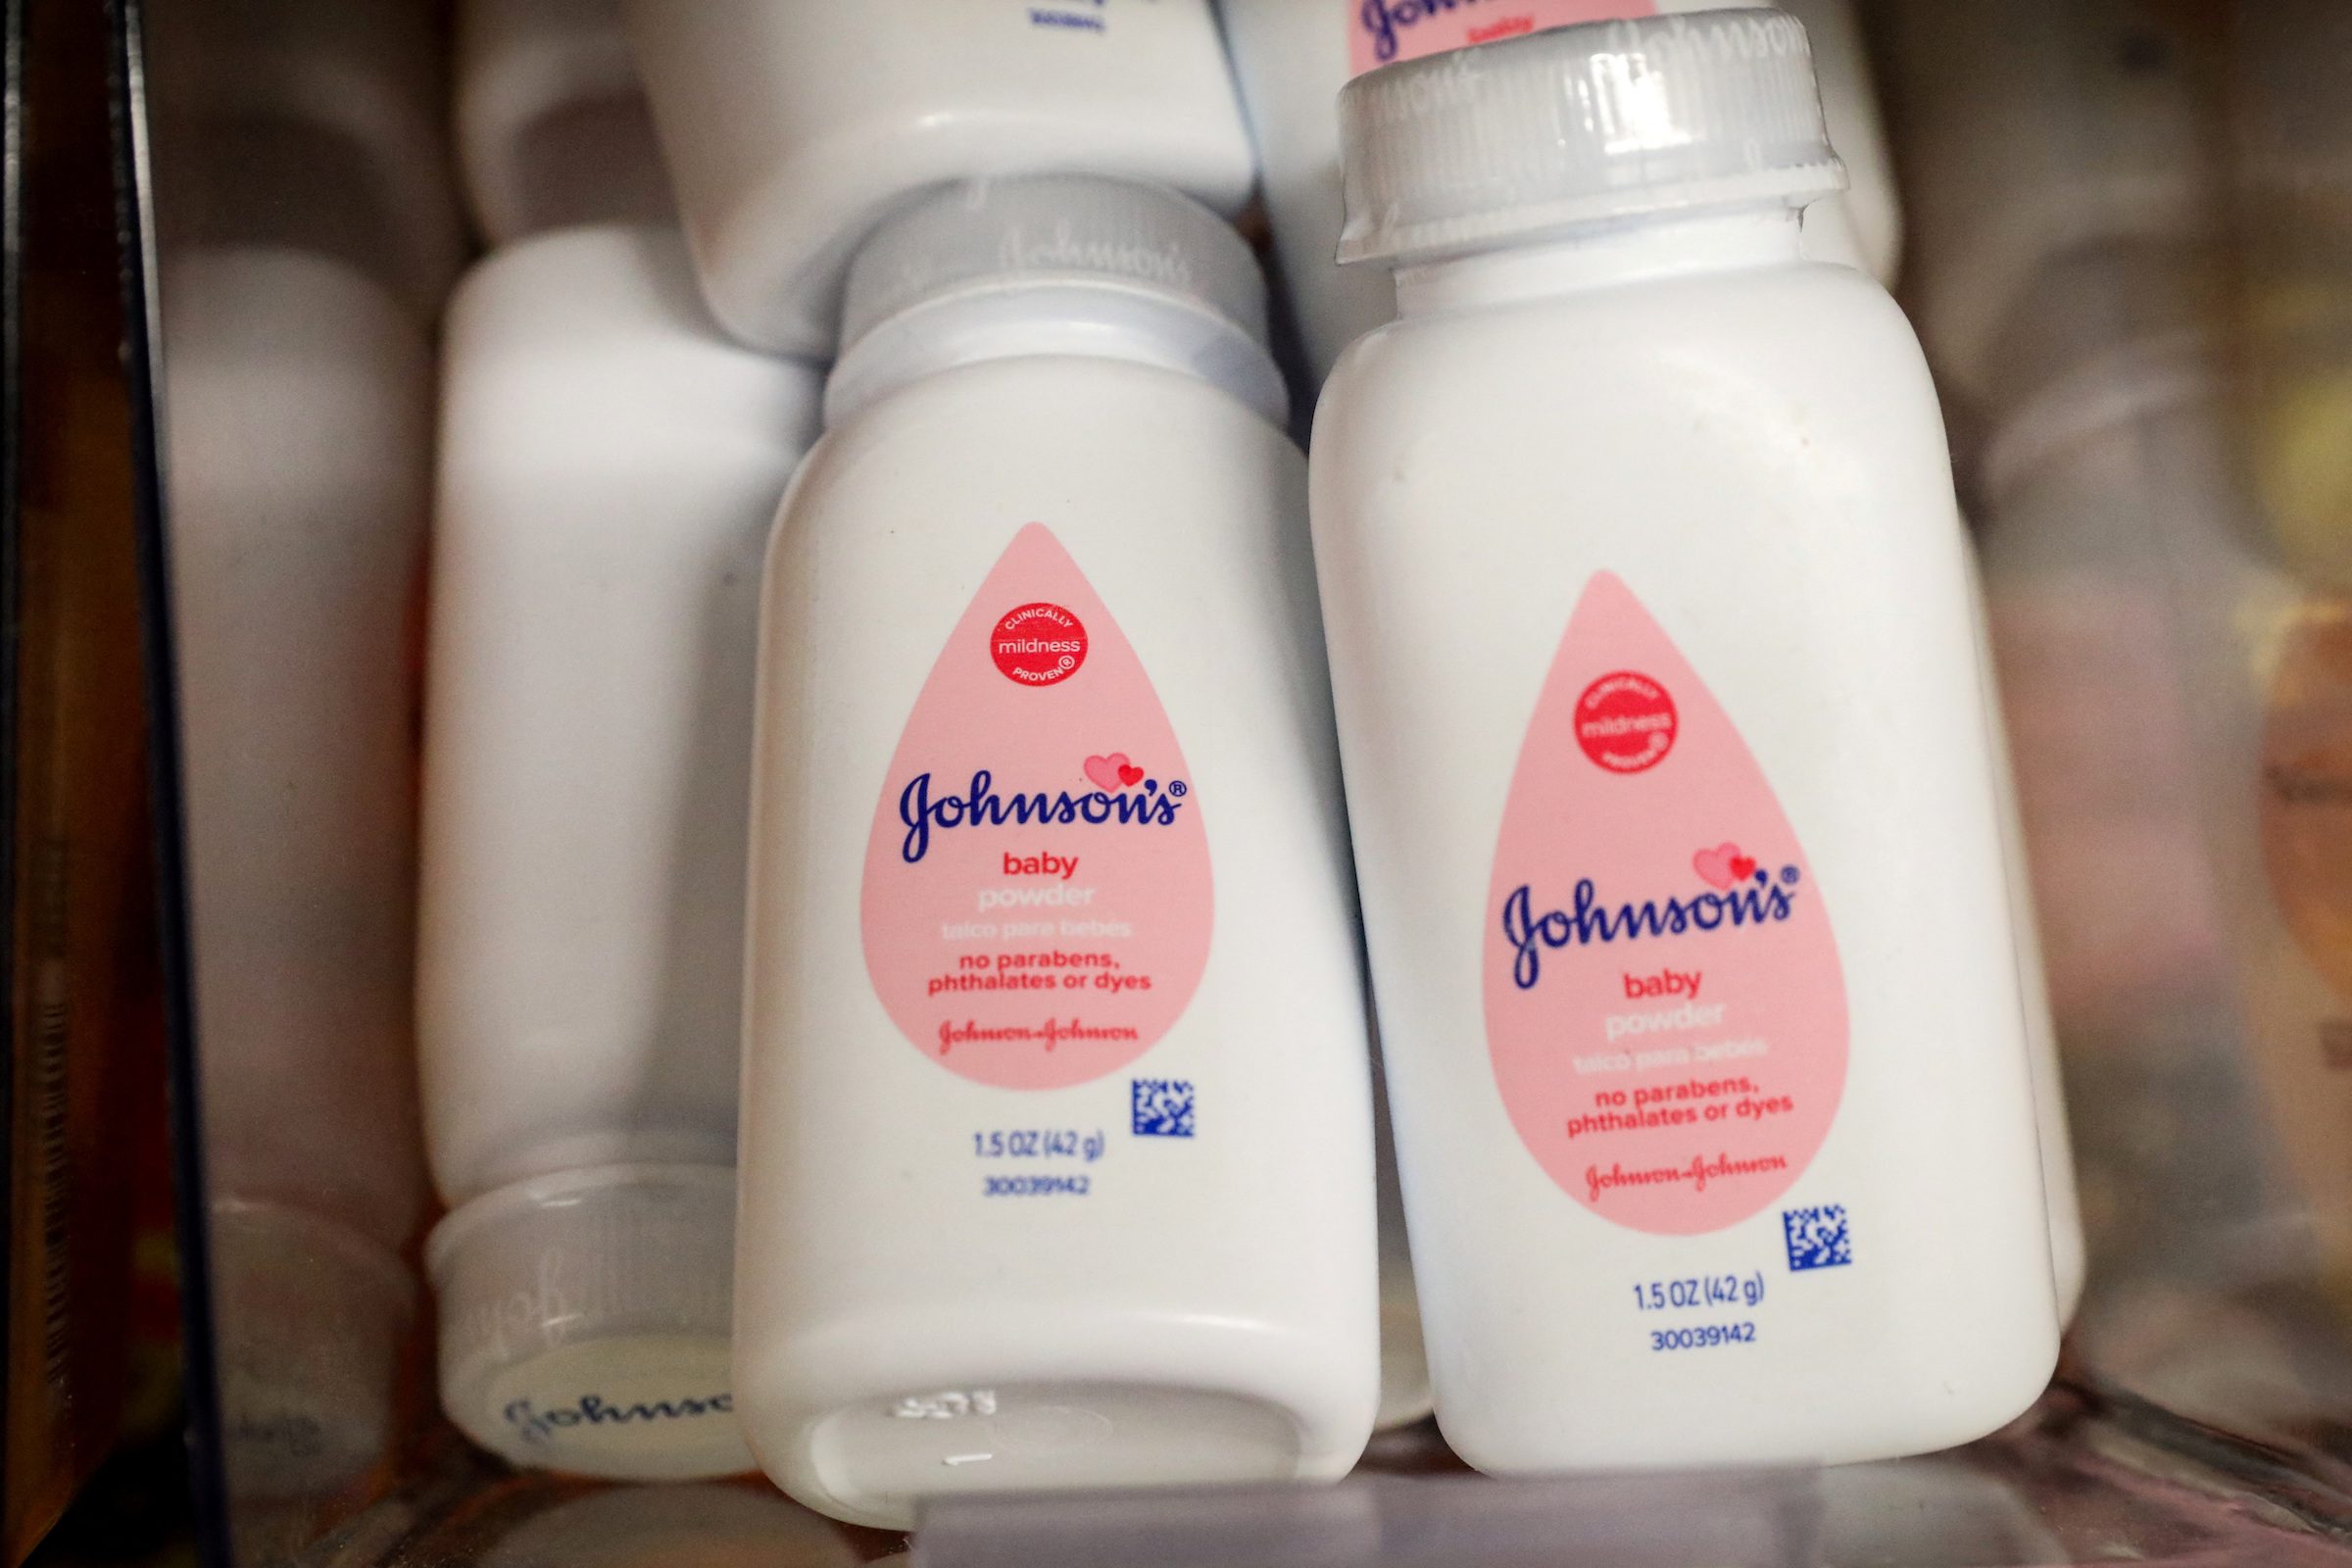 J&J must pay $18.8 million to California cancer patient in baby powder suit